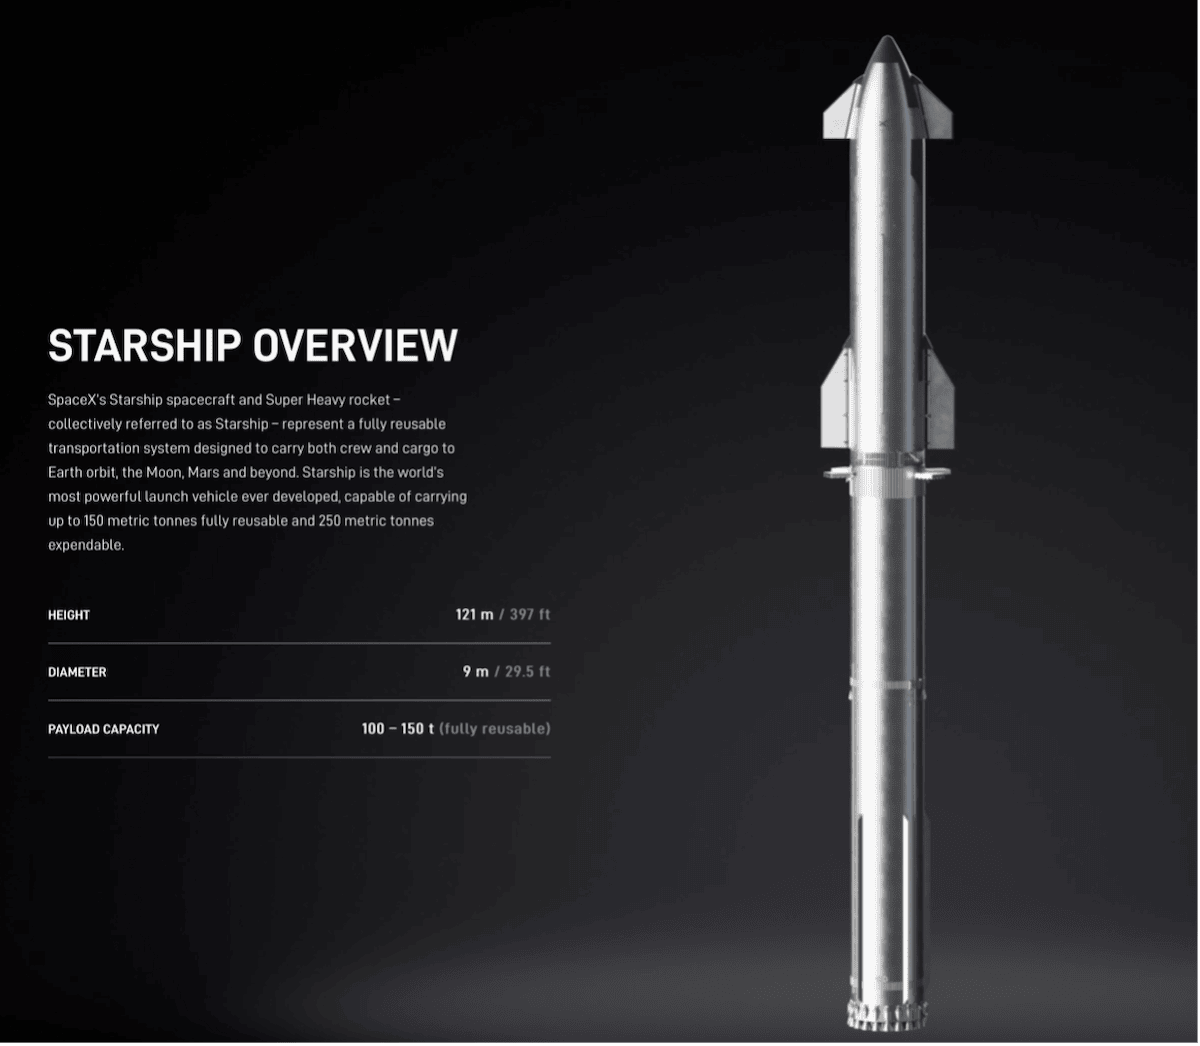 Starship Overview